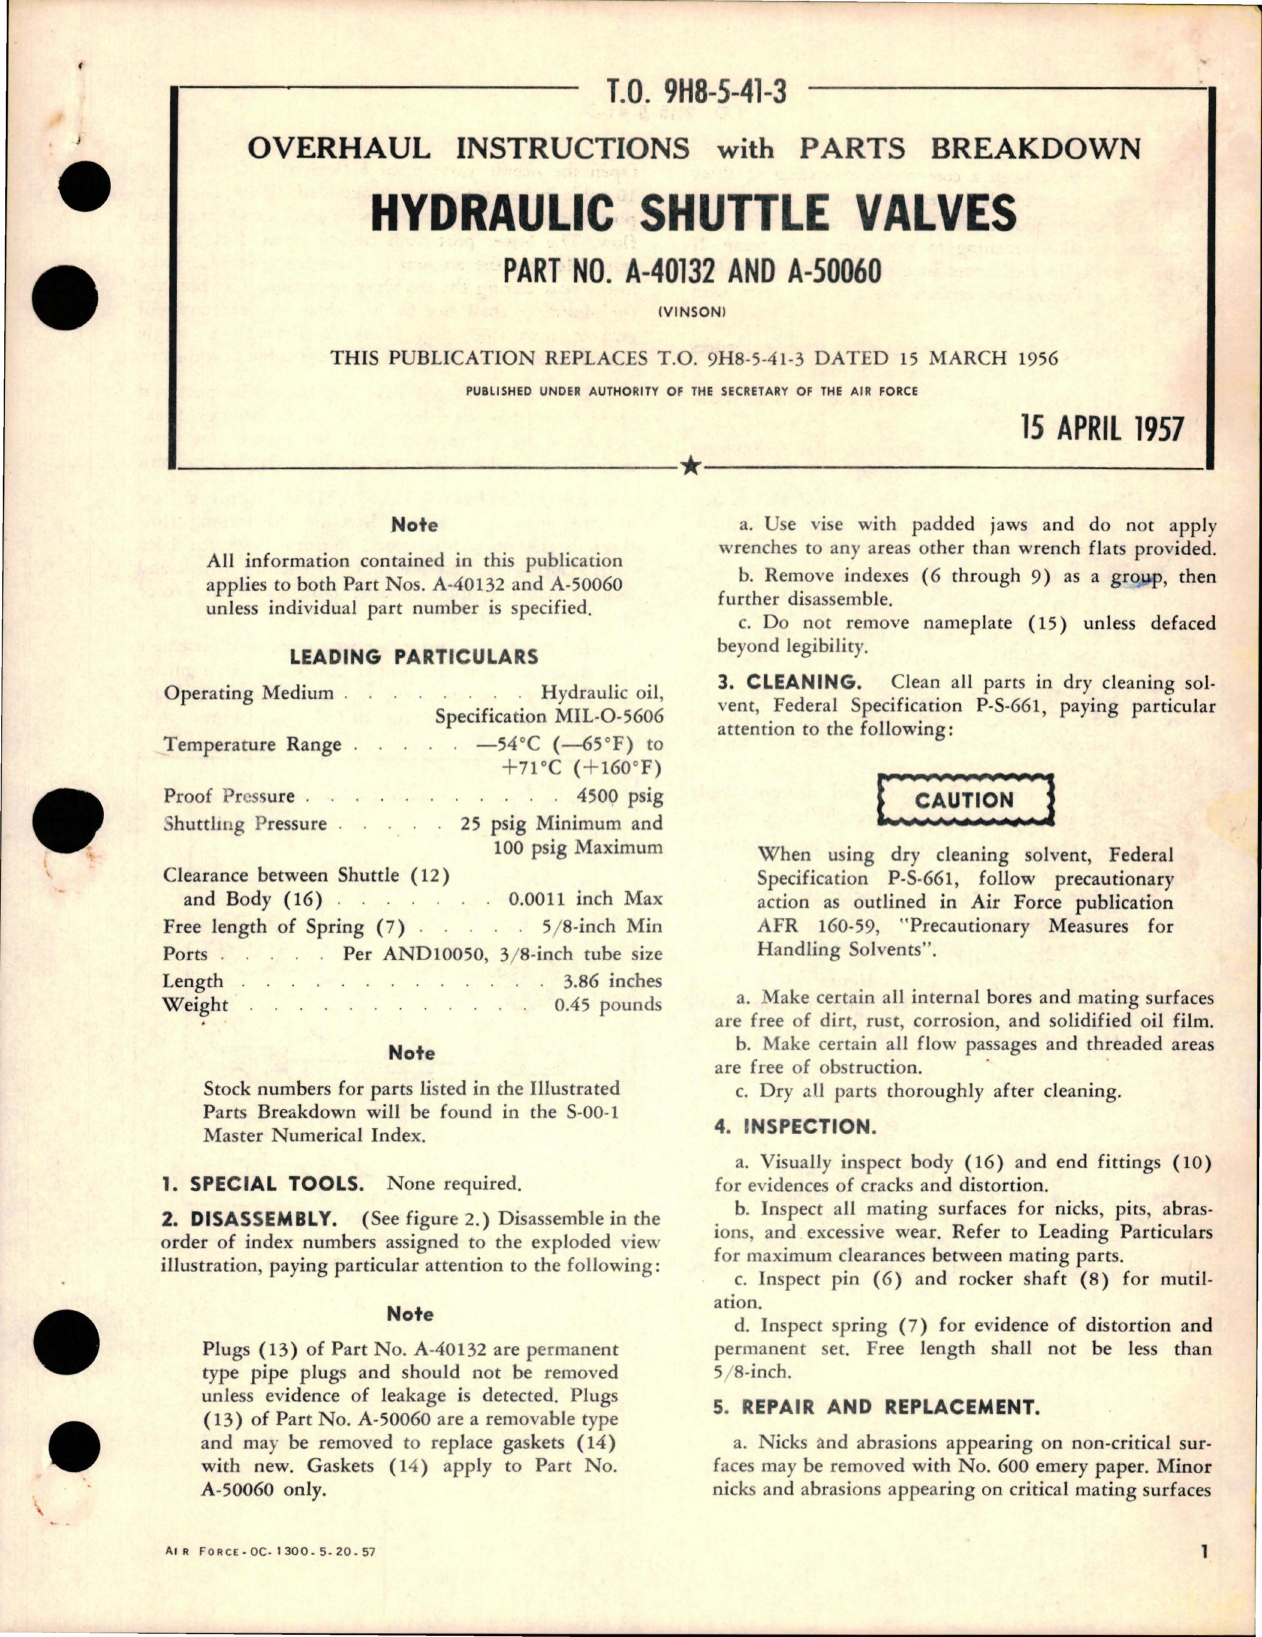 Sample page 1 from AirCorps Library document: Overhaul Instructions with Parts Breakdown for Hydraulic Shuttle Valves - Part A-40132 and A-50060